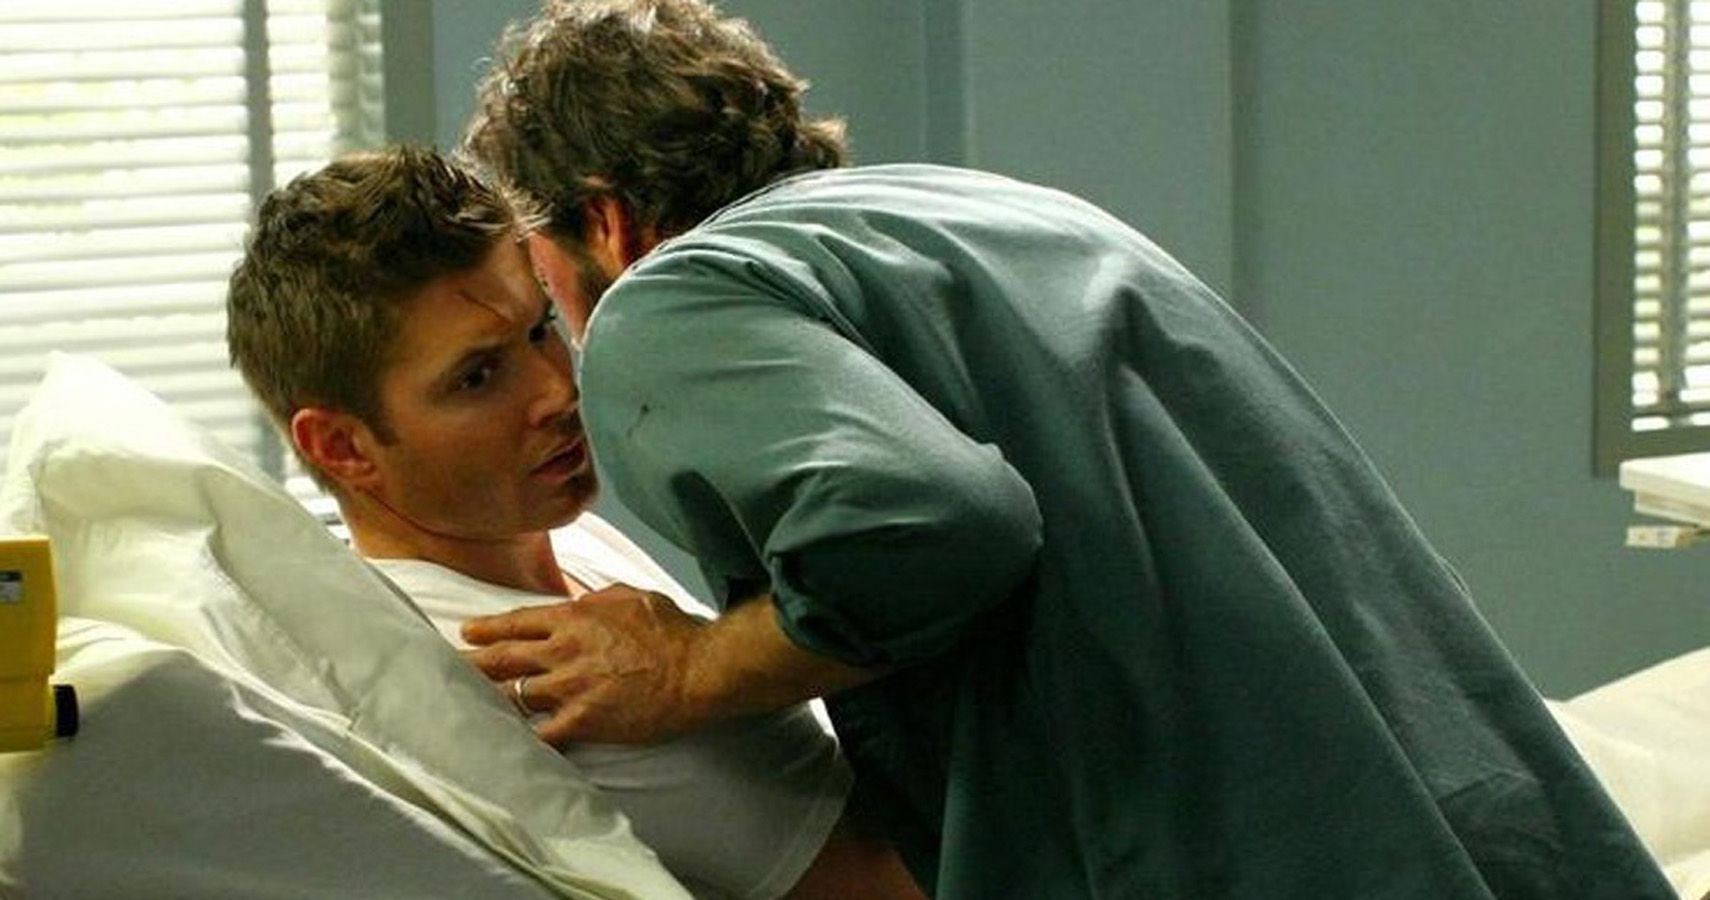 The 15 Most Heartbreaking Supernatural Episodes